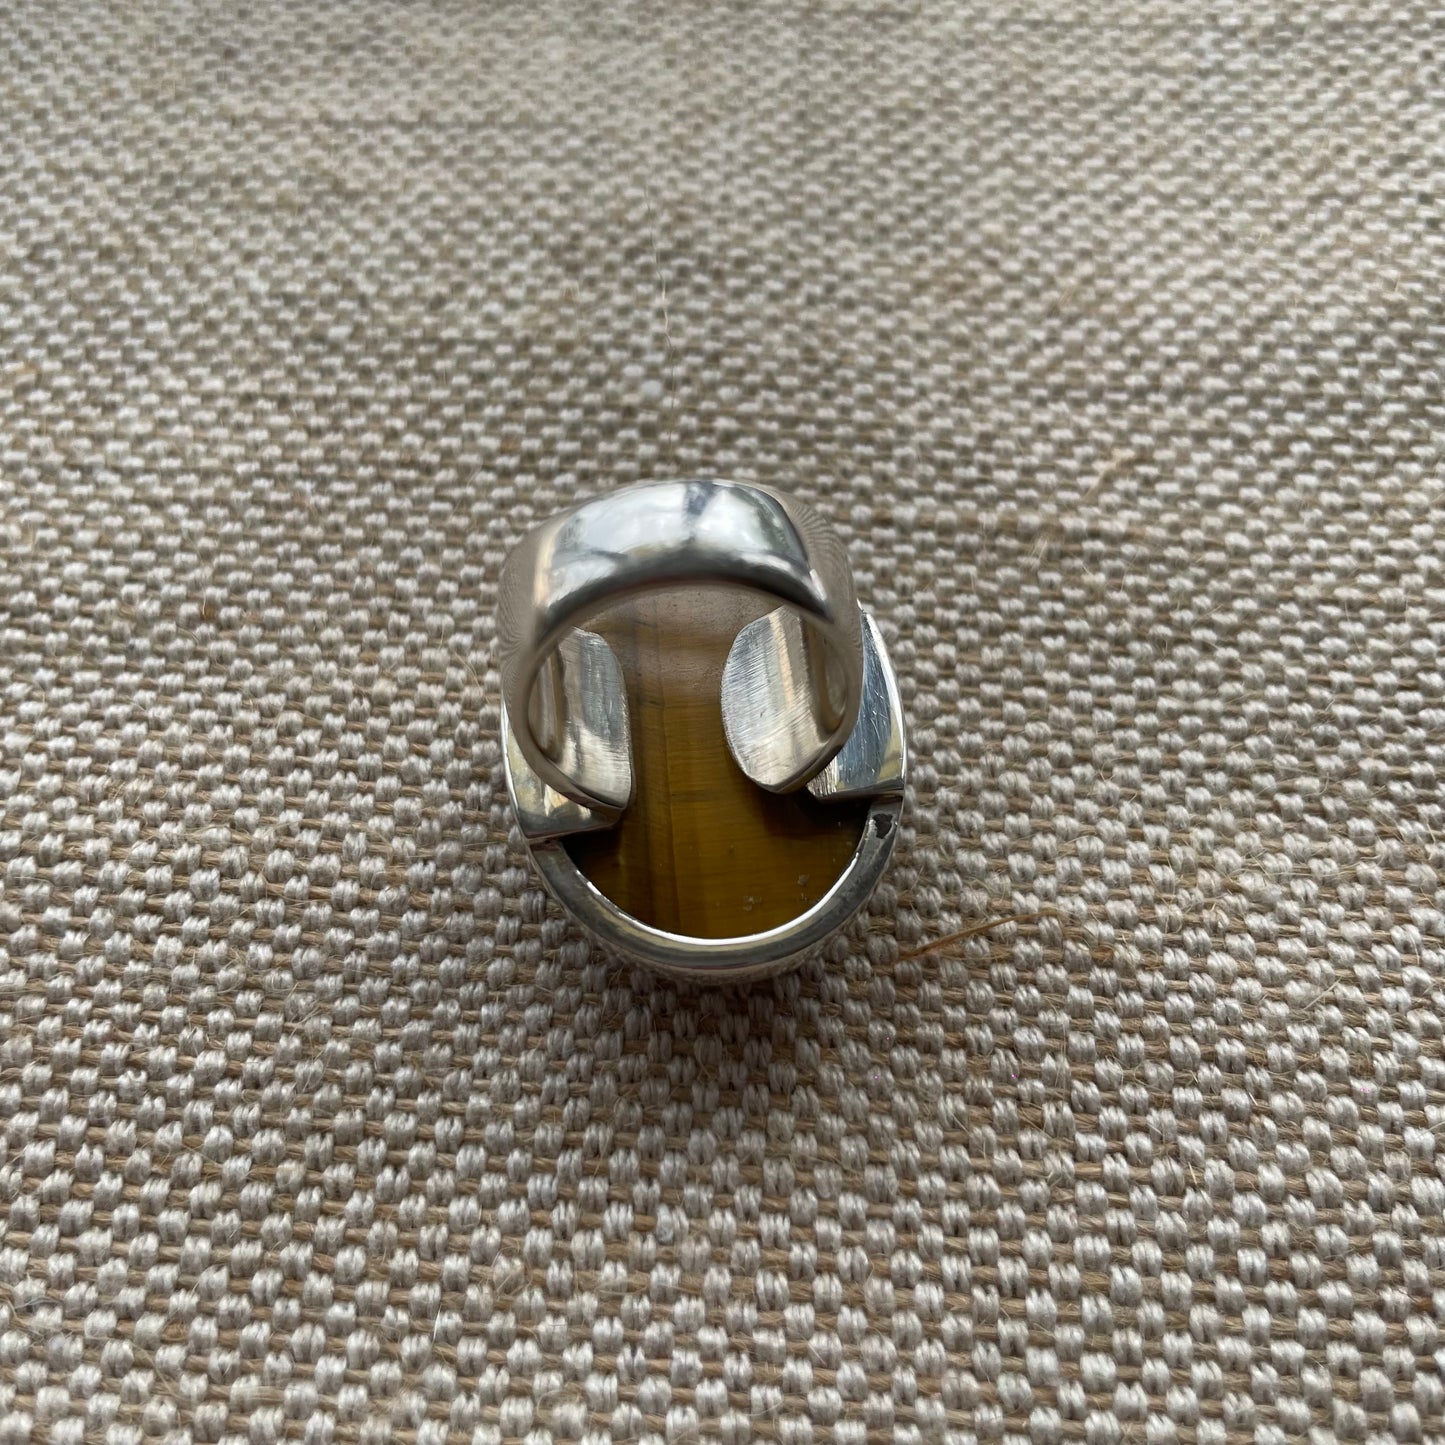 Early 2000 925 Silver Tiger eye ring